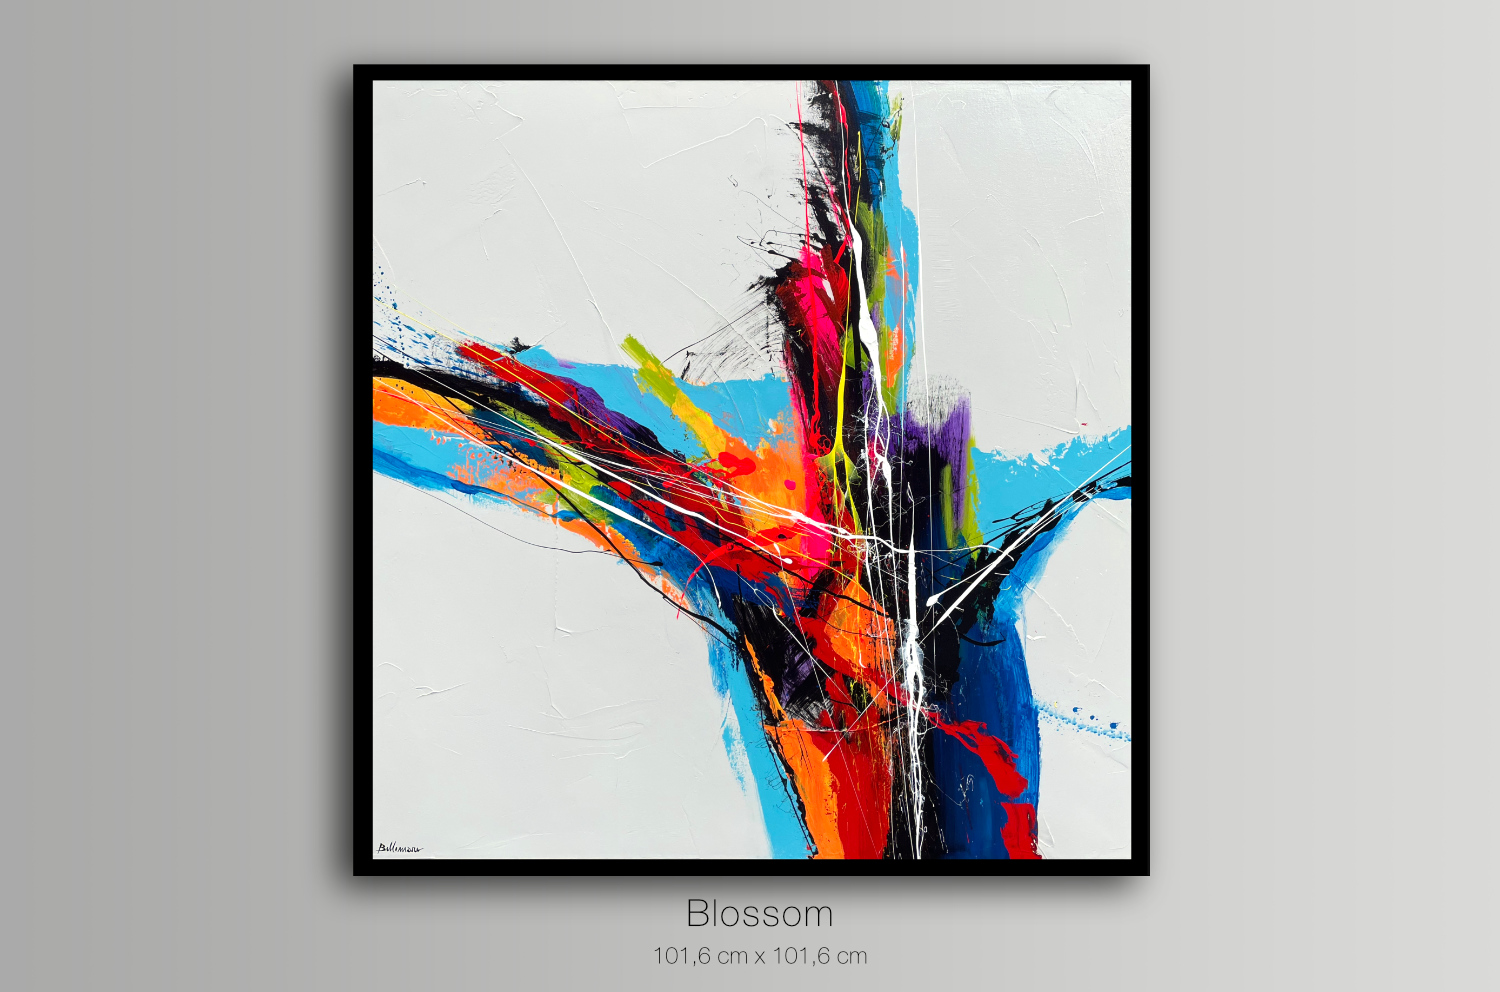 Blossom - Featured